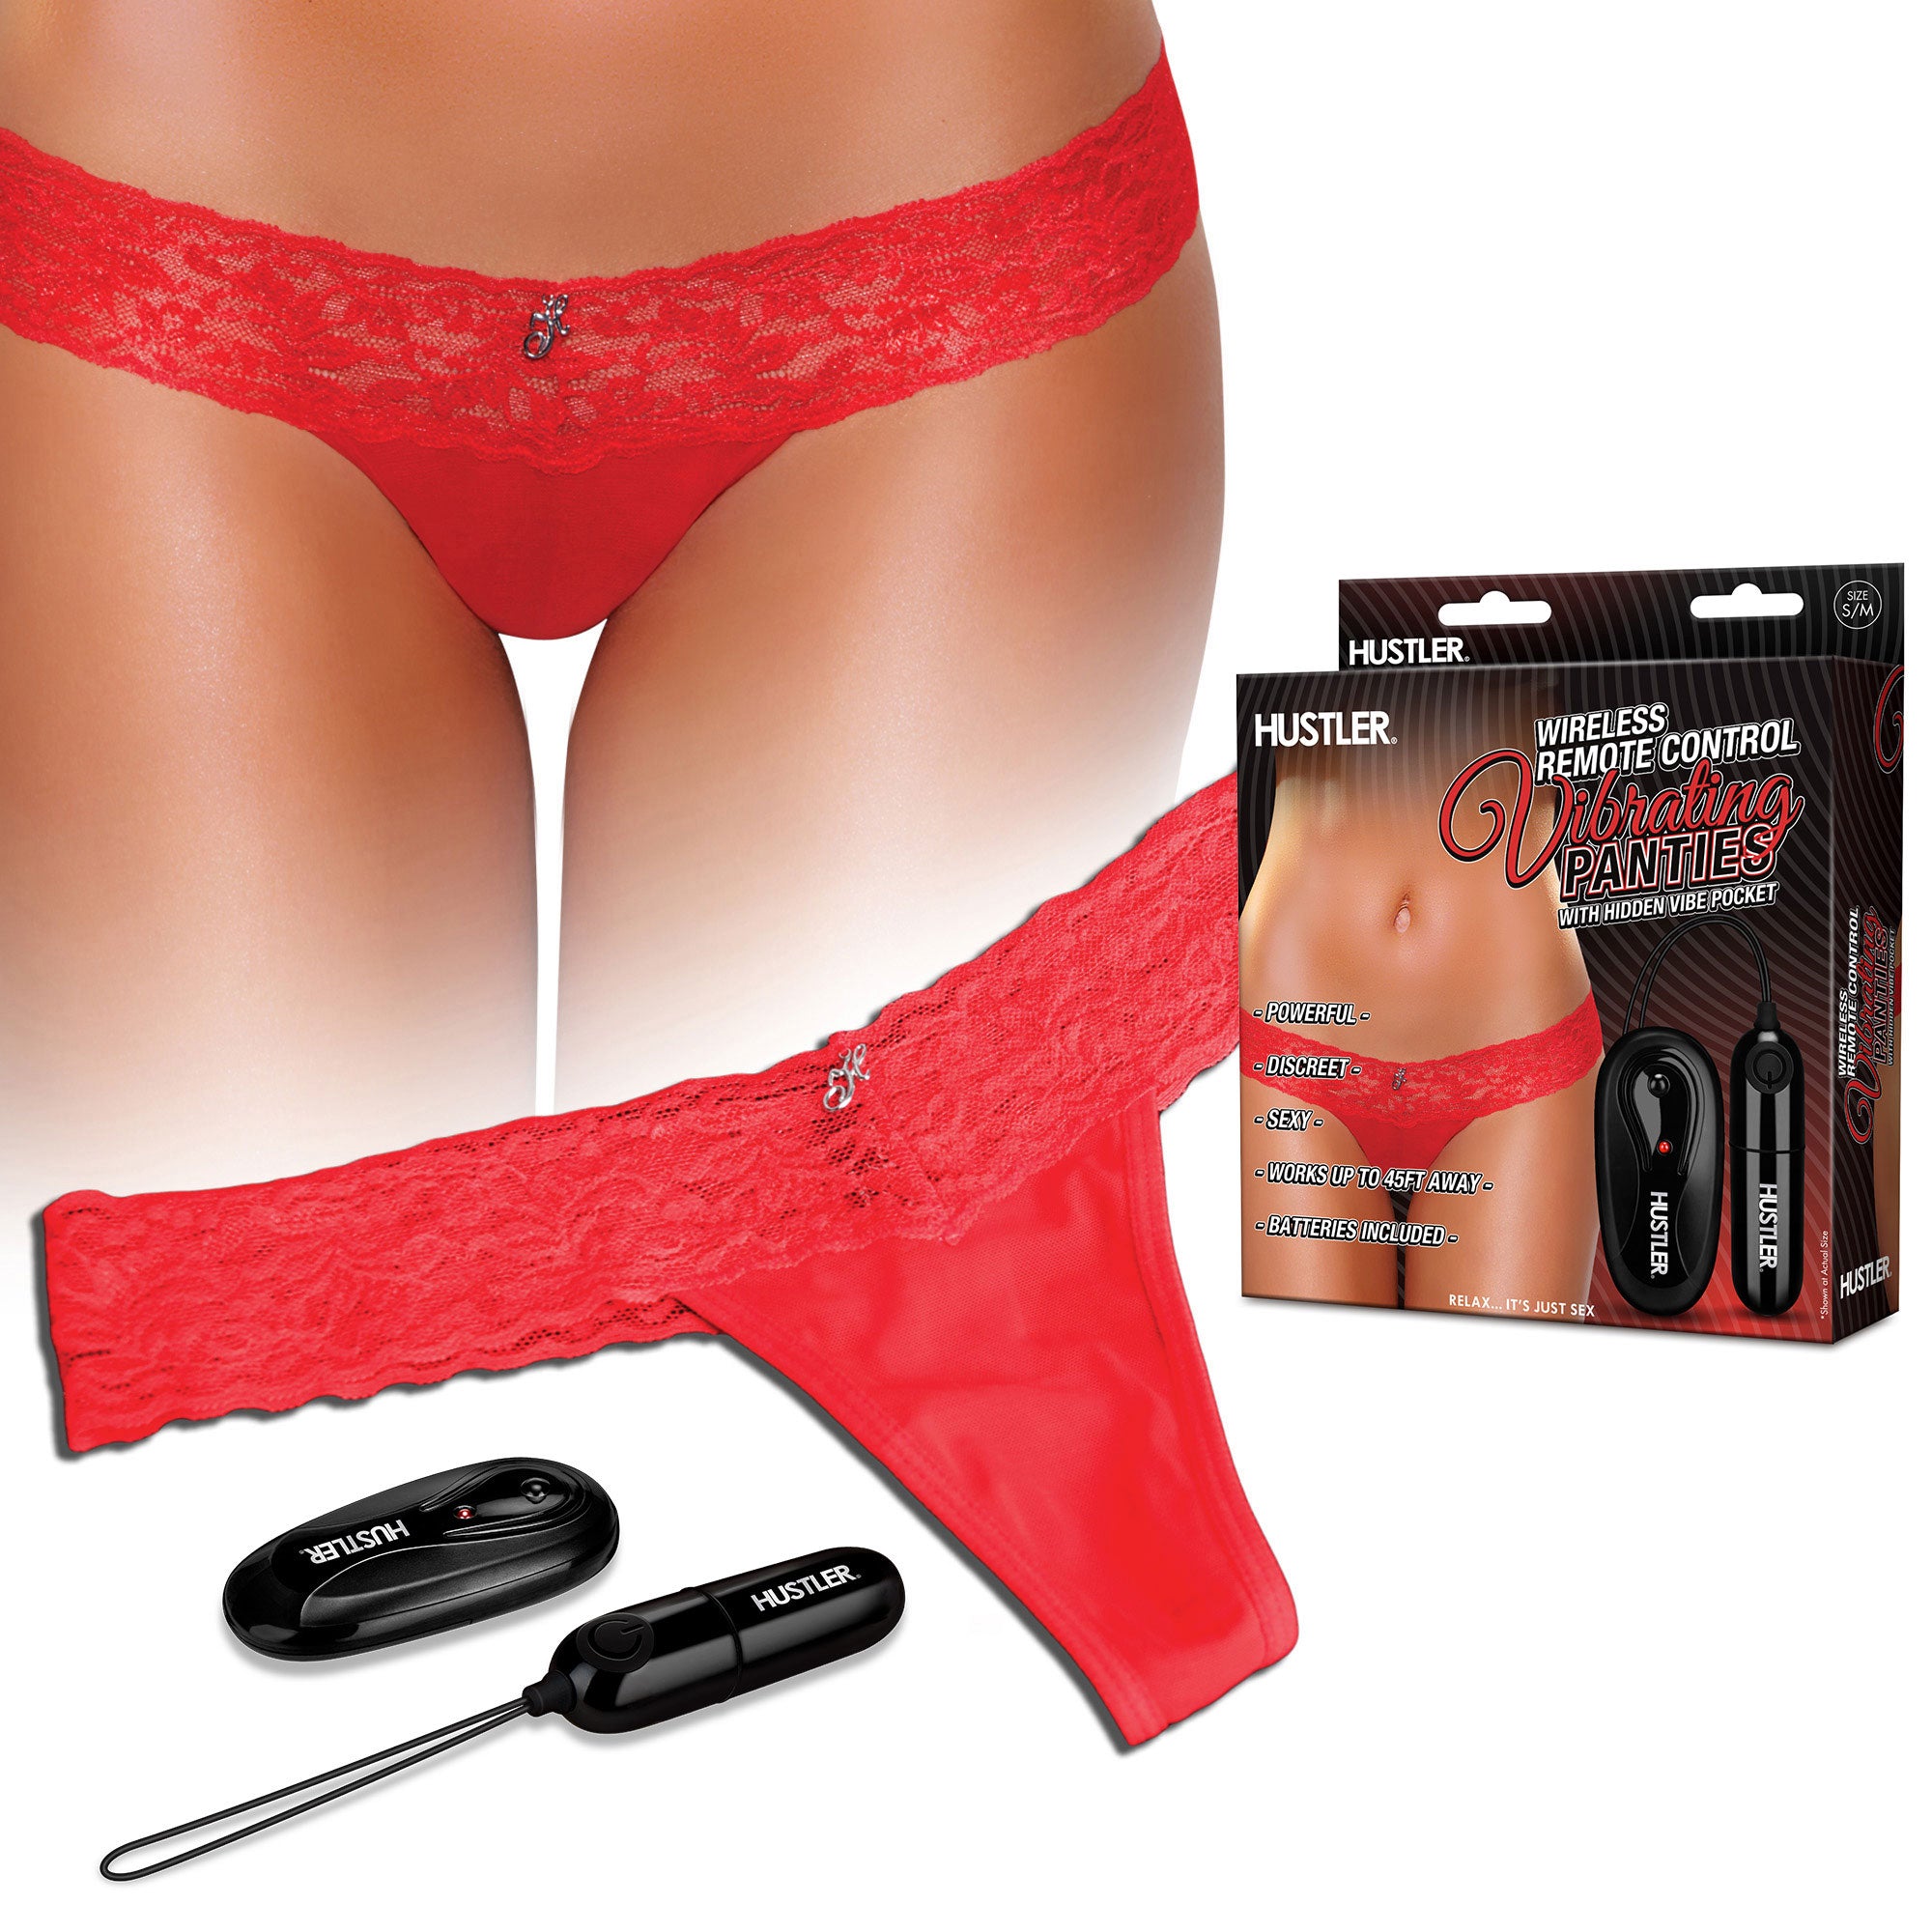 Wireless Remote Control Vibrating Panties with Hidden Vibe Pocket - Red